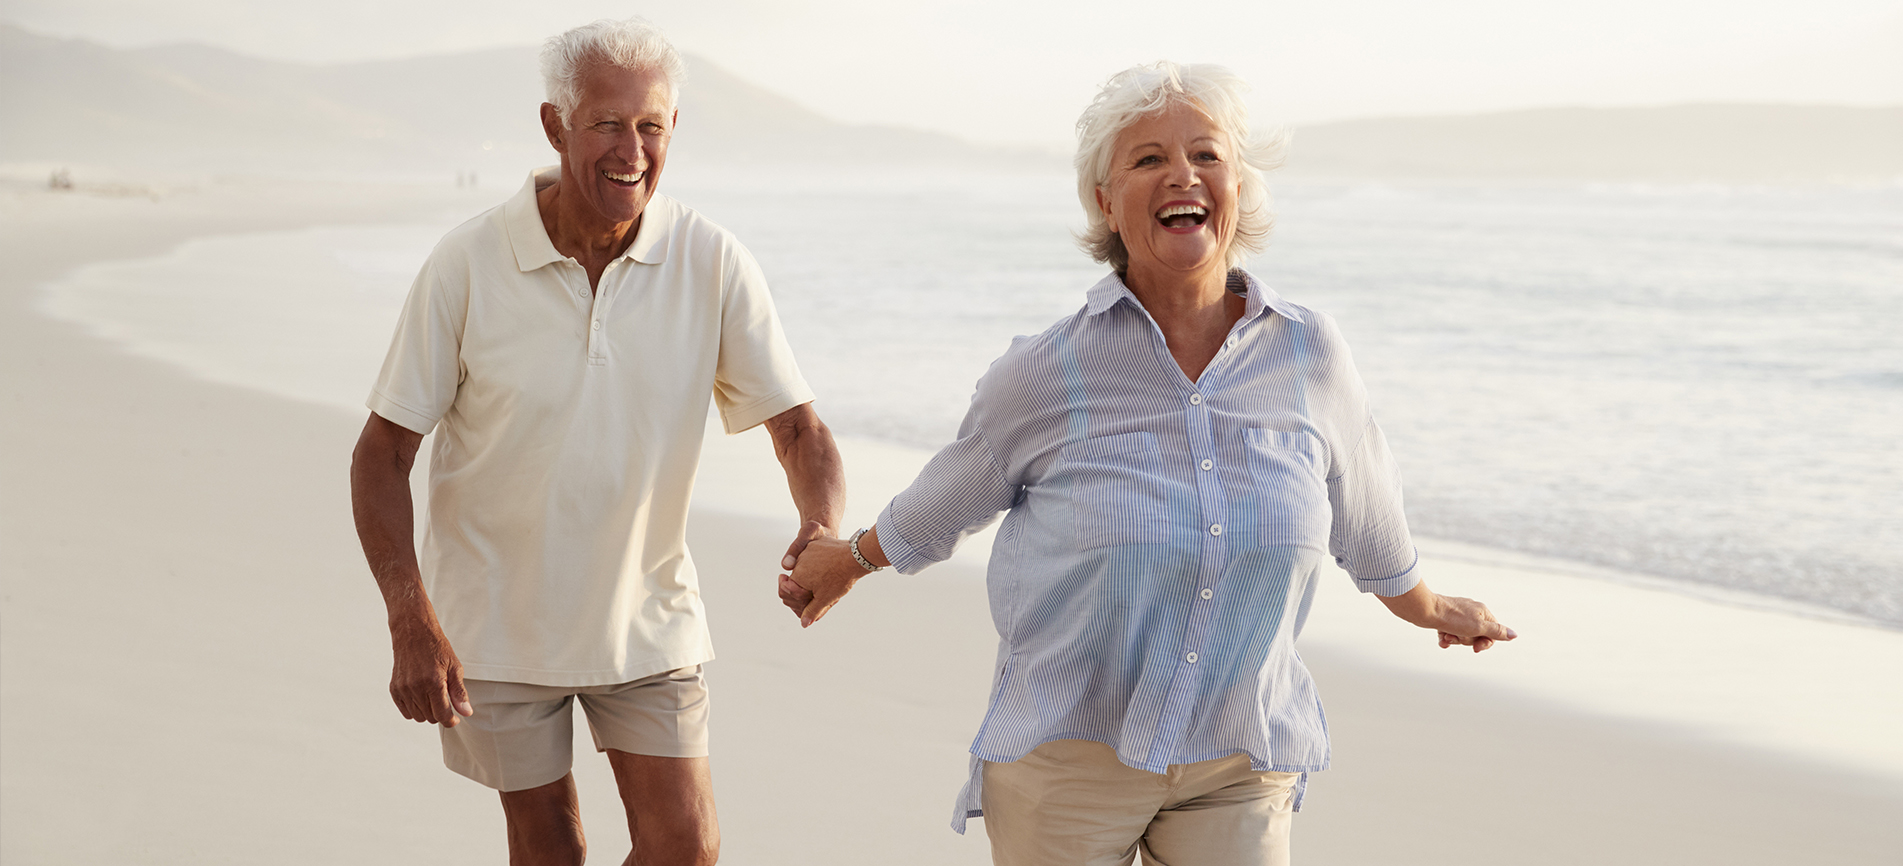 An happy elderly couple hold hands and walk on the beach on a bright day